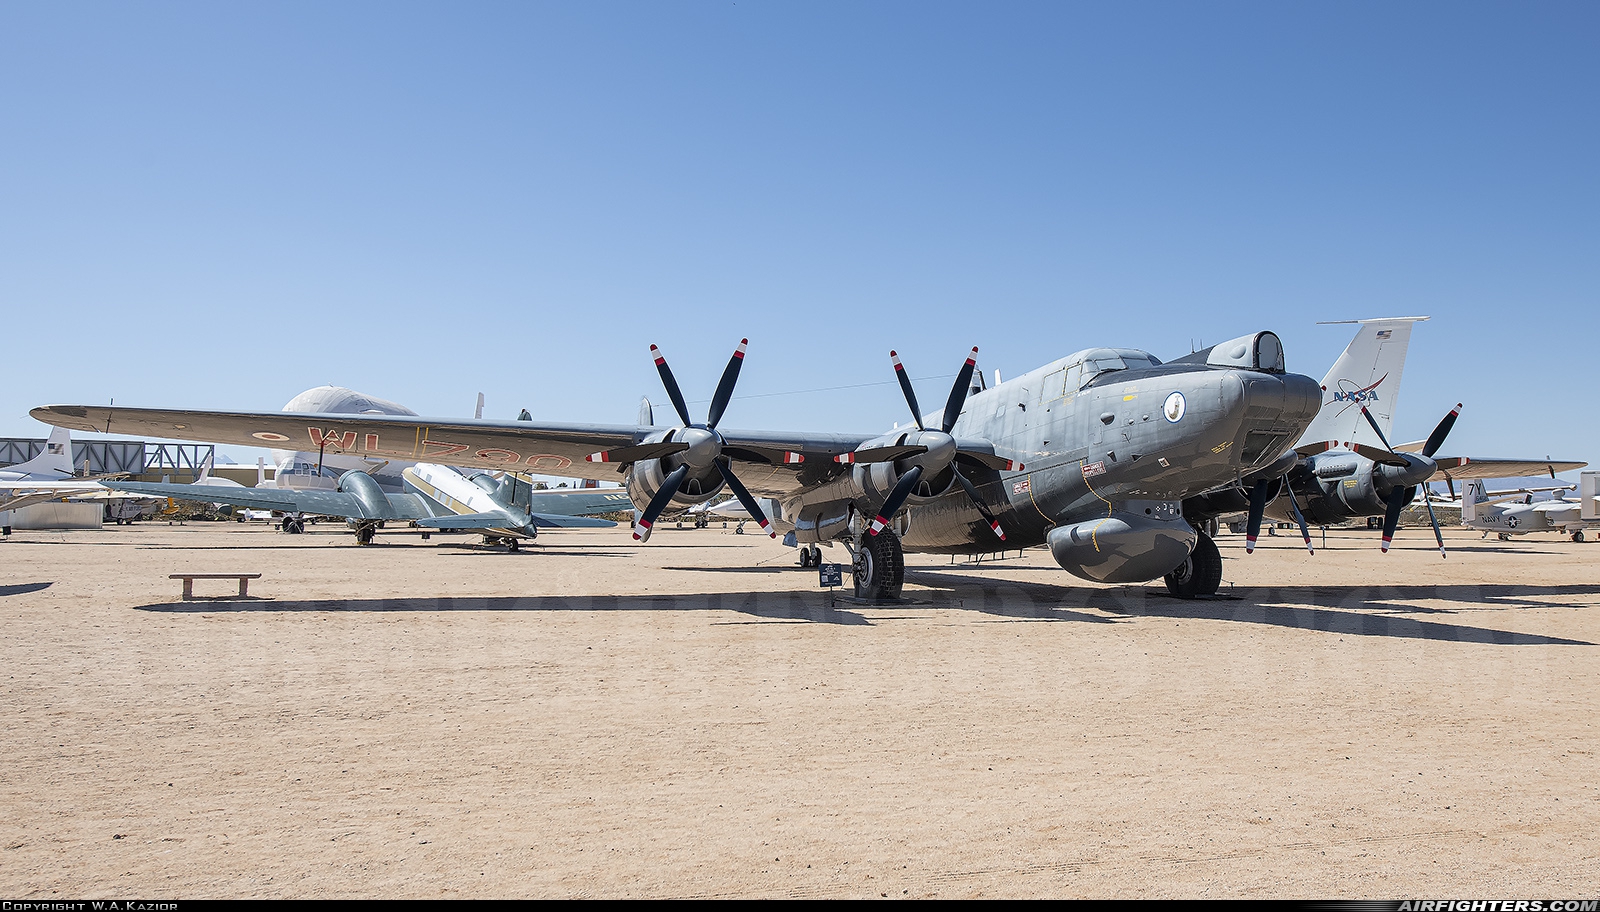 UK - Air Force Avro 696 Shackleton AEW.2 WL790 at Tucson - Pima Air and Space Museum, USA